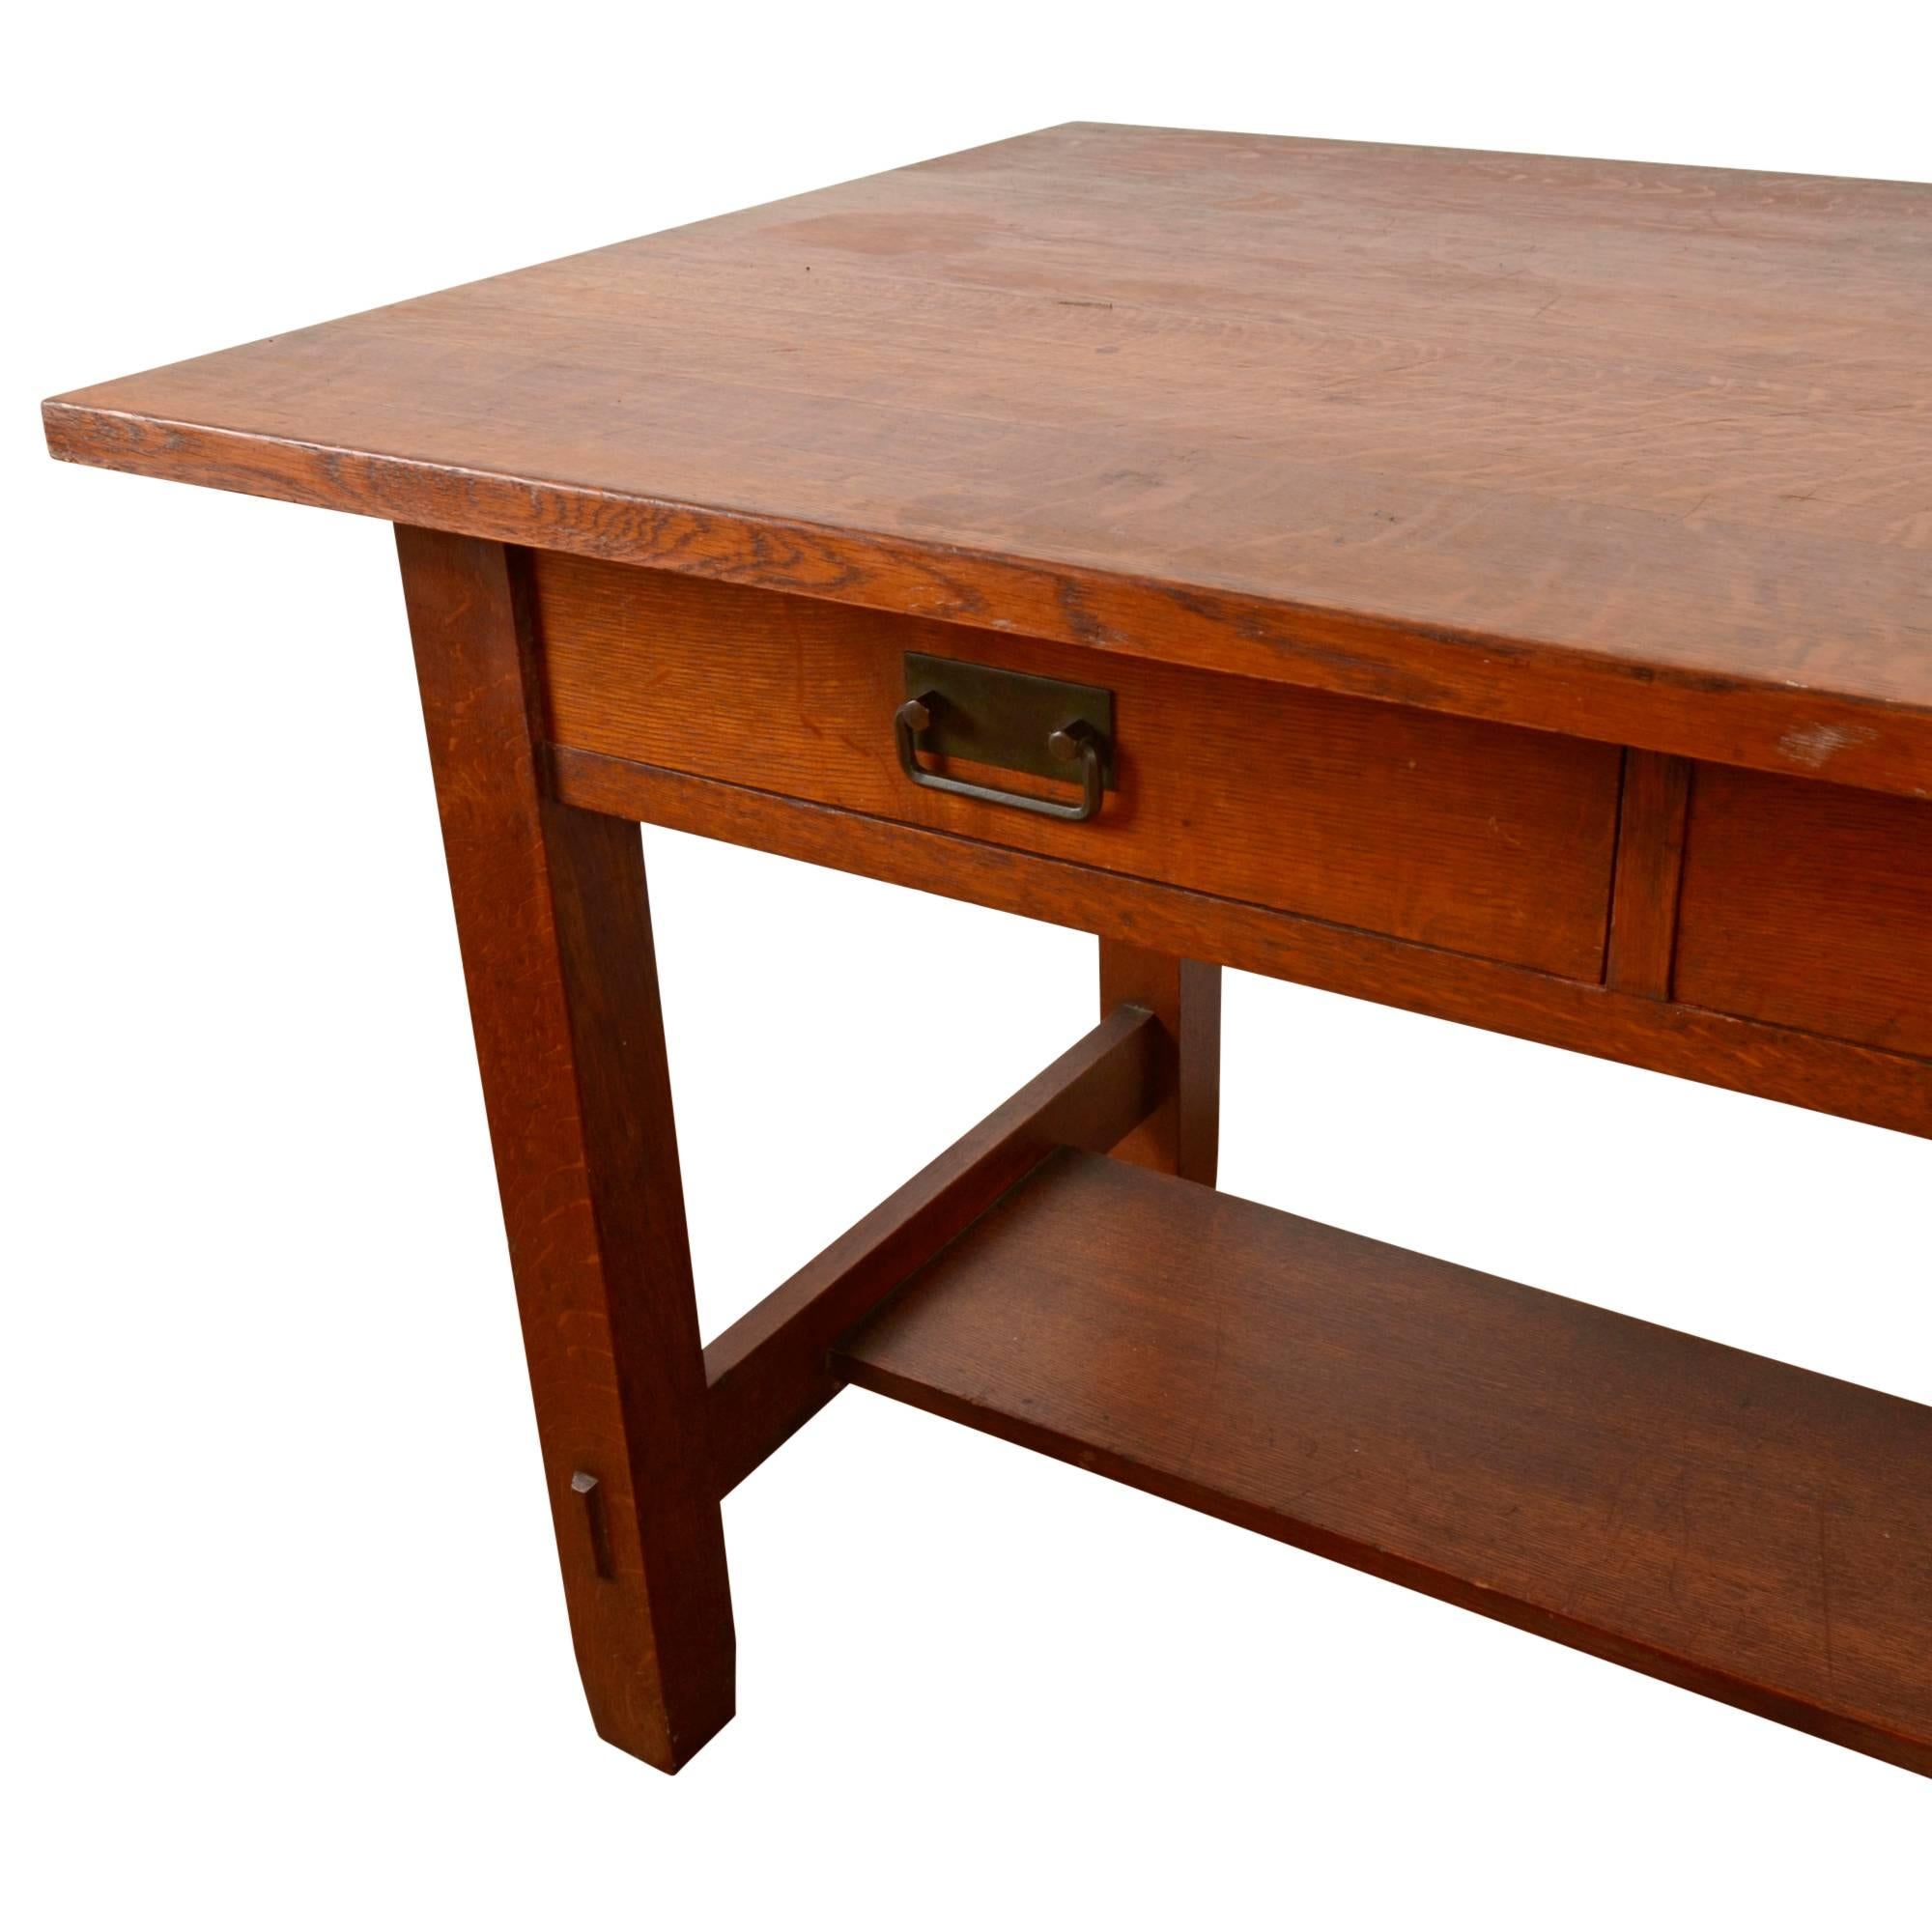 Sturdy and hard working, it is easy to imagine this handsome oak stickley style library desk in its original setting: an Arts & Crafts style library, filled with dusty, leather-bound volumes. Though unattributed and unsigned, this piece boasts